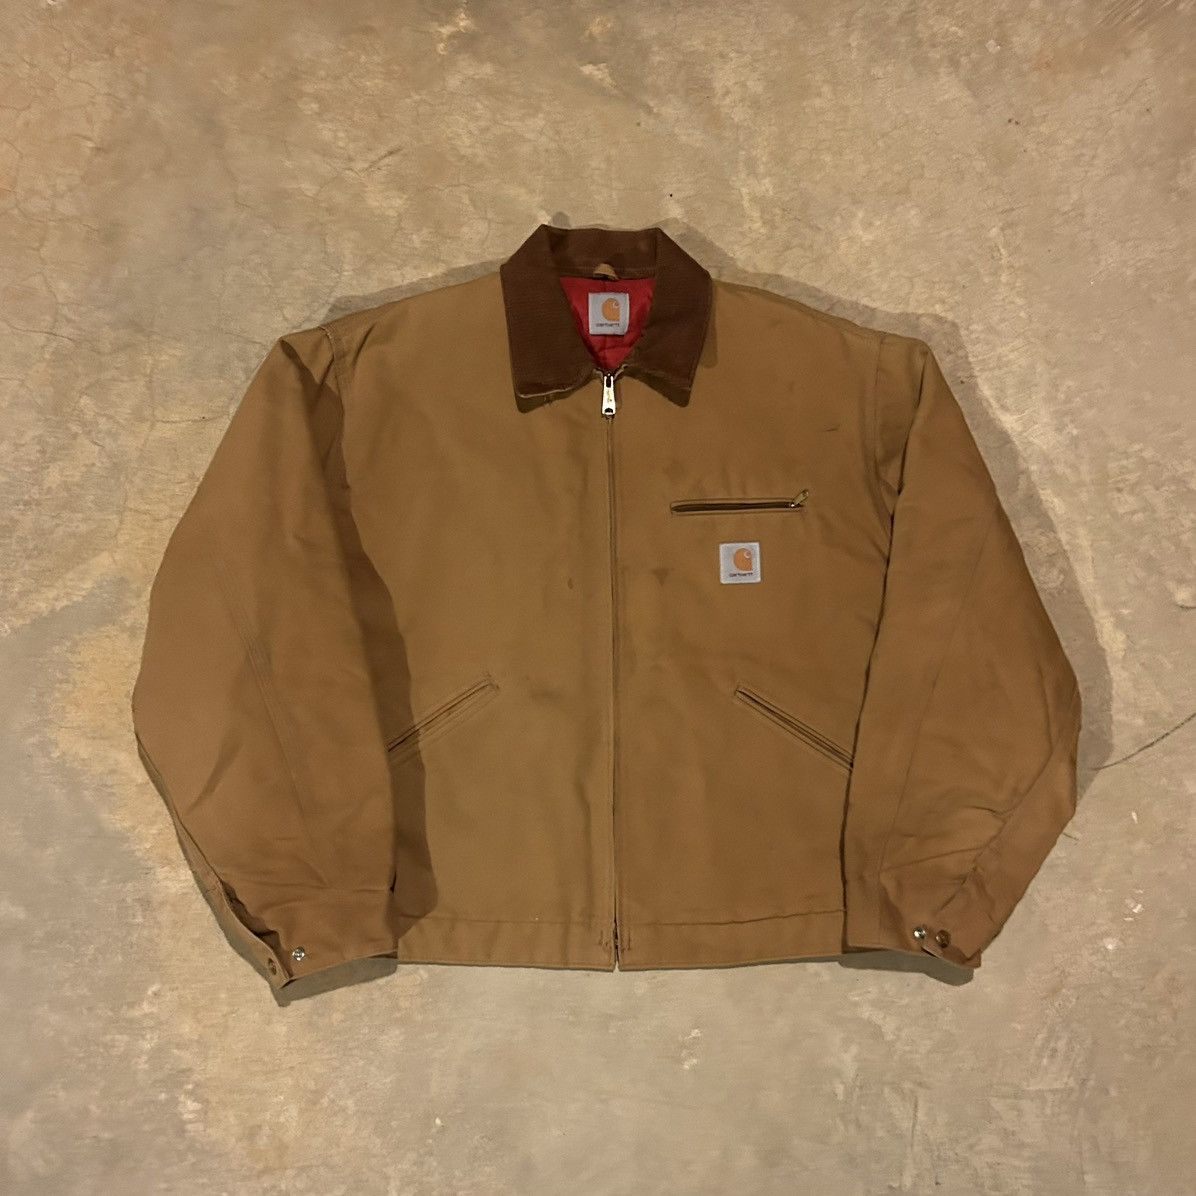 Pre-owned Carhartt X Vintage Crazy Vintage 80's Carhartt Detroit Work Jacket Red Lining In Tan